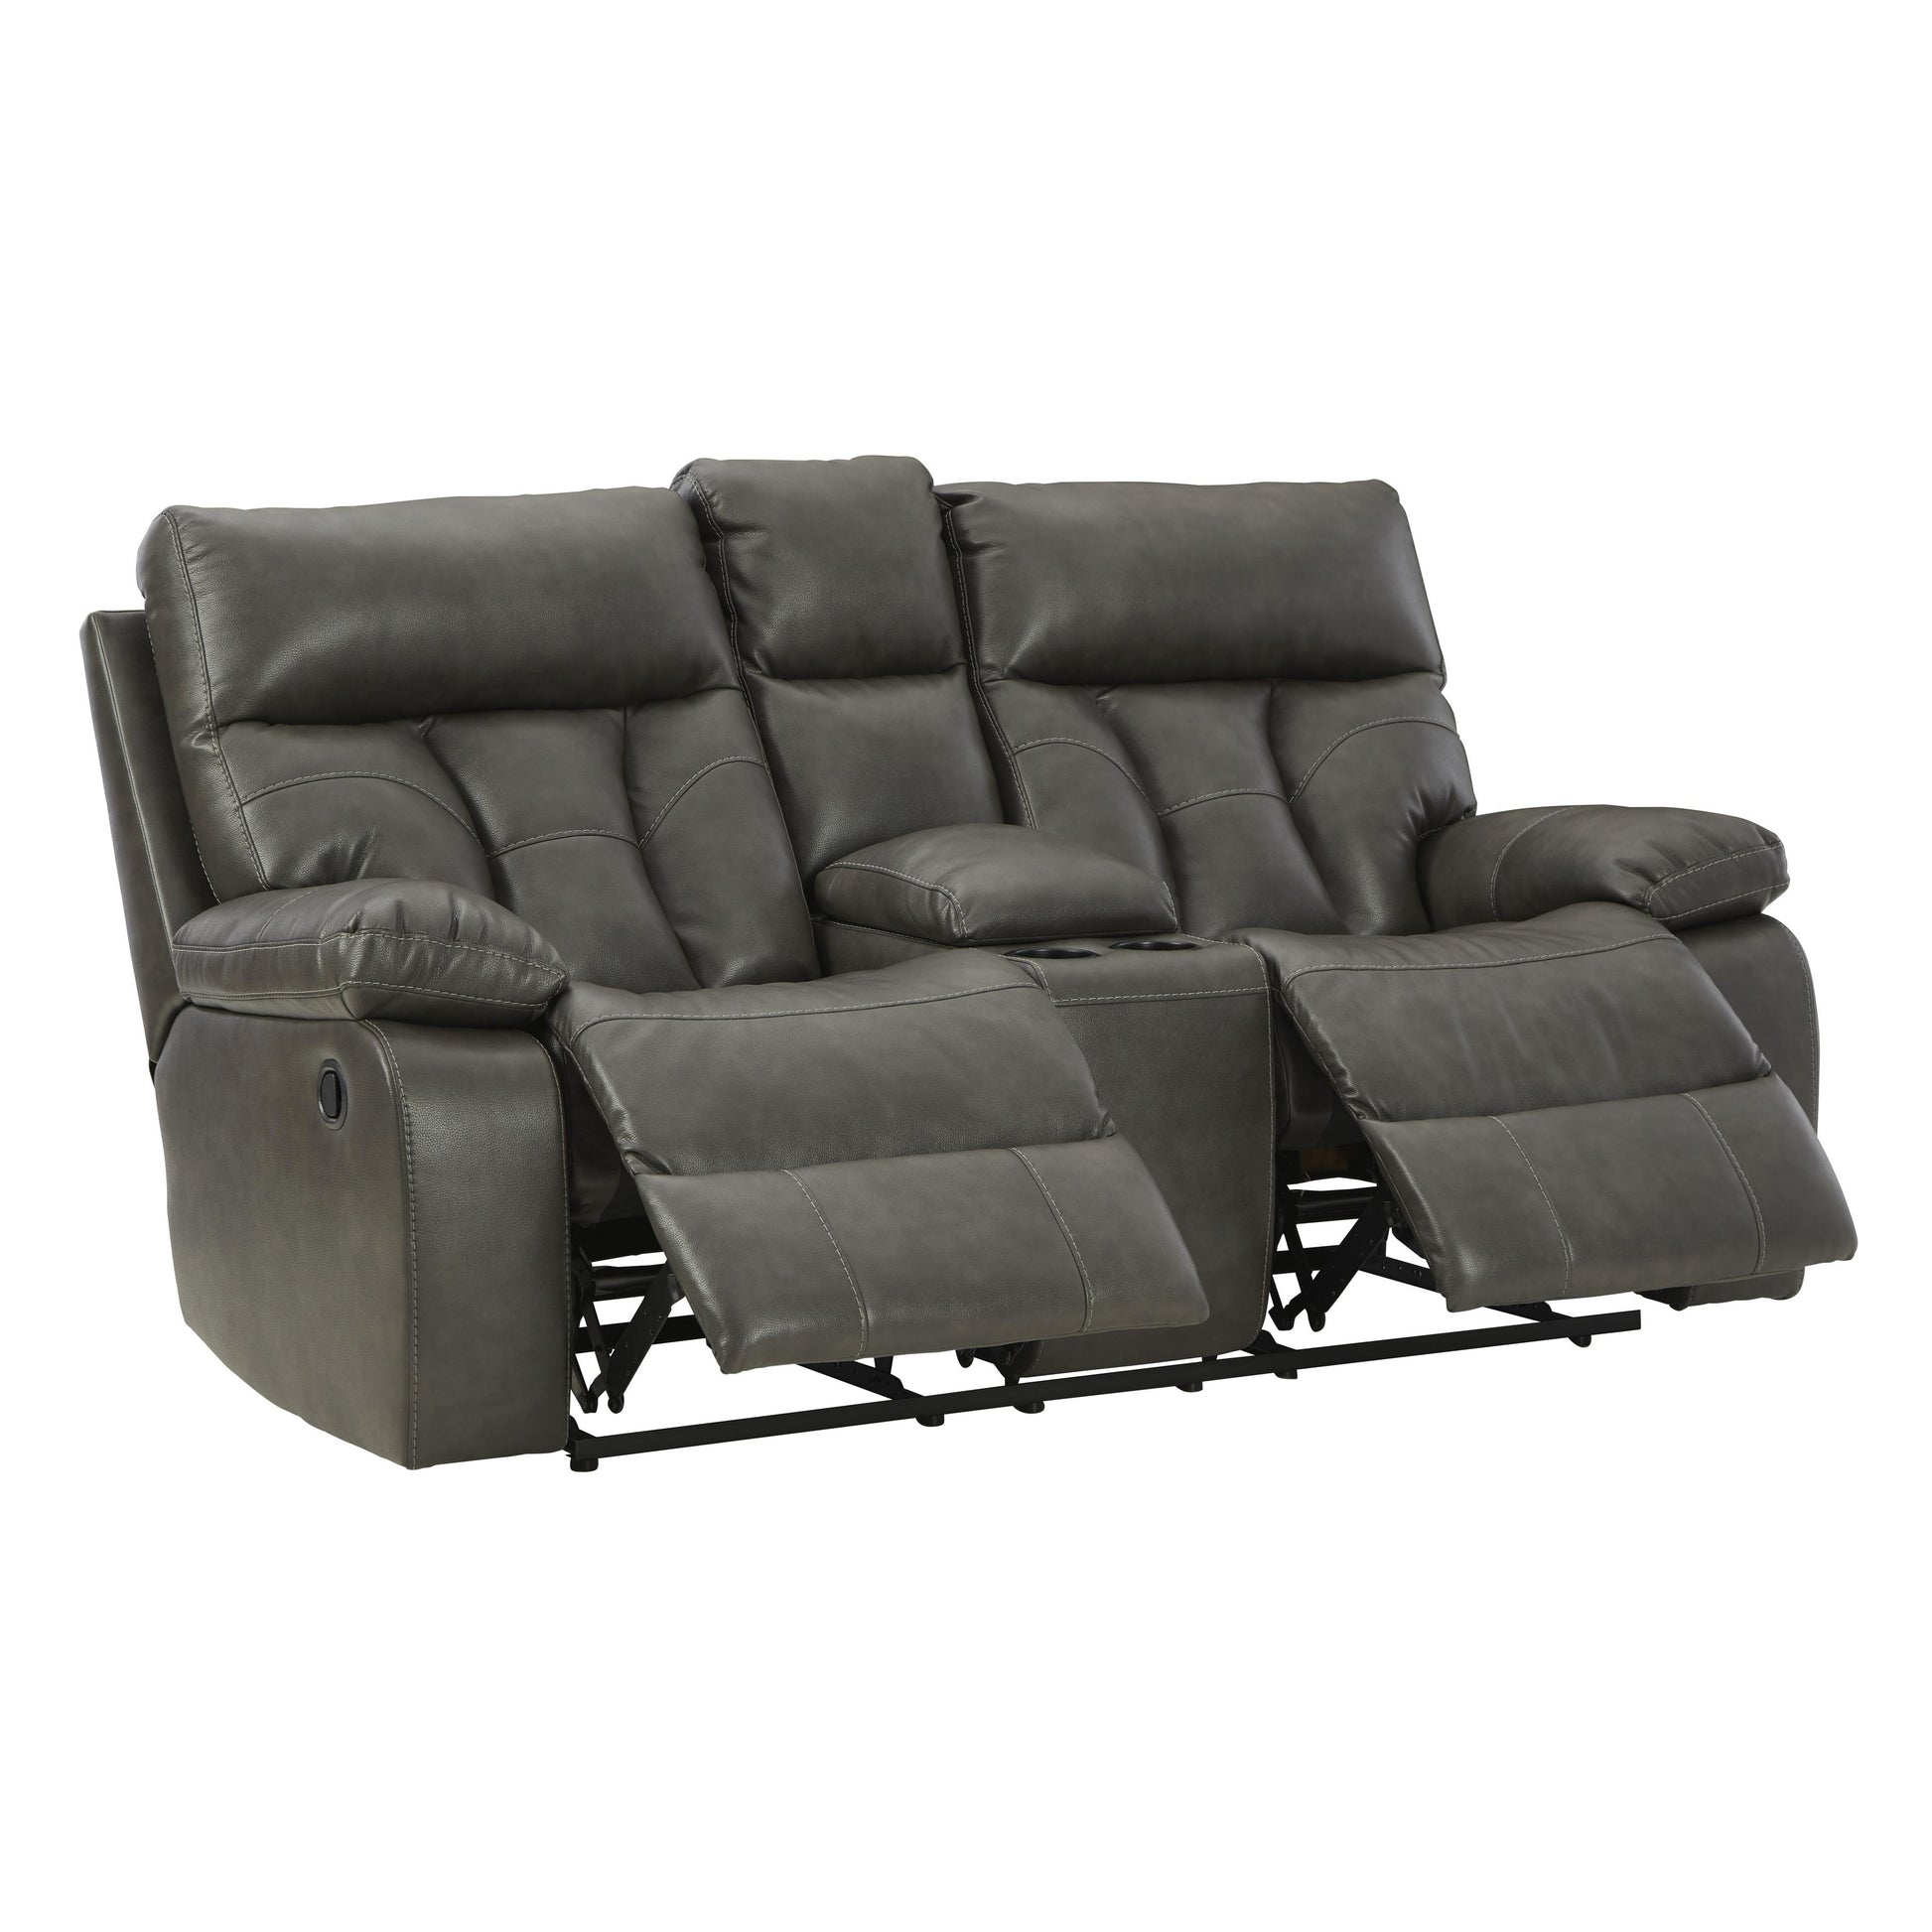 Signature Design by Ashley Willamen Power Reclining Leather Look Loveseat 1480194 IMAGE 1